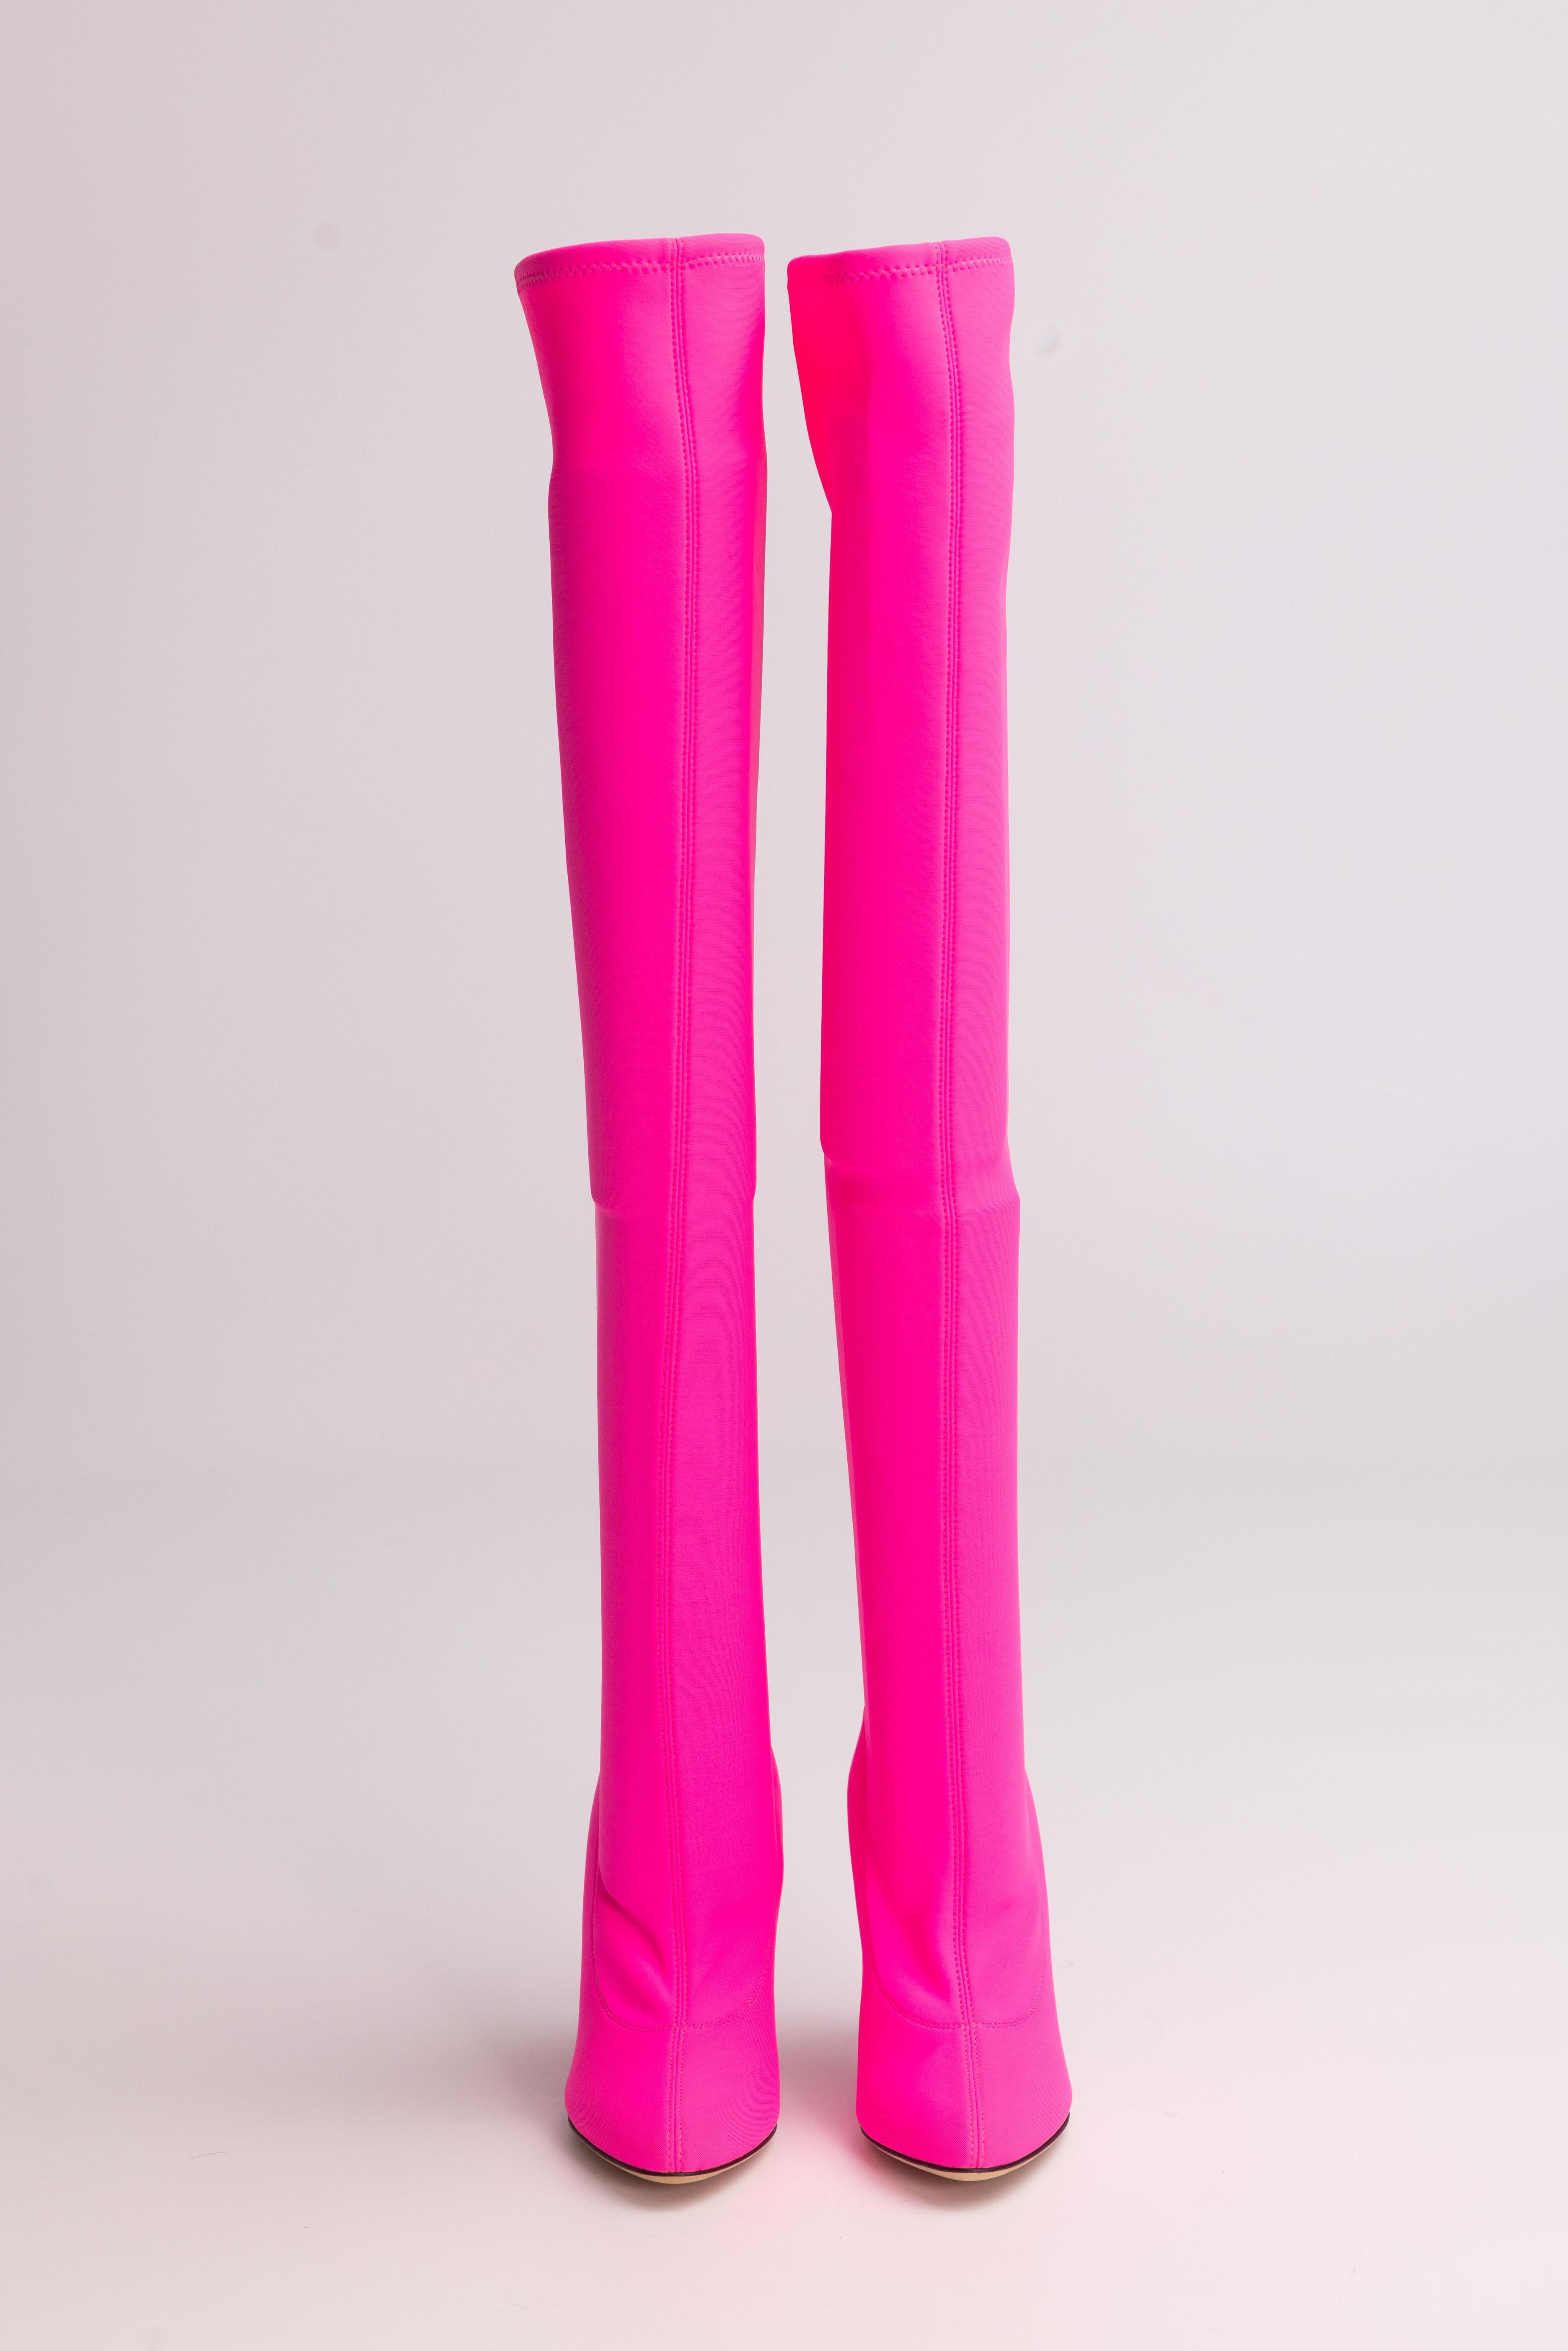 Giuseppe Zanotti Hot Pink Knee High Heeled Boots (EU 36) In Good Condition For Sale In Montreal, Quebec